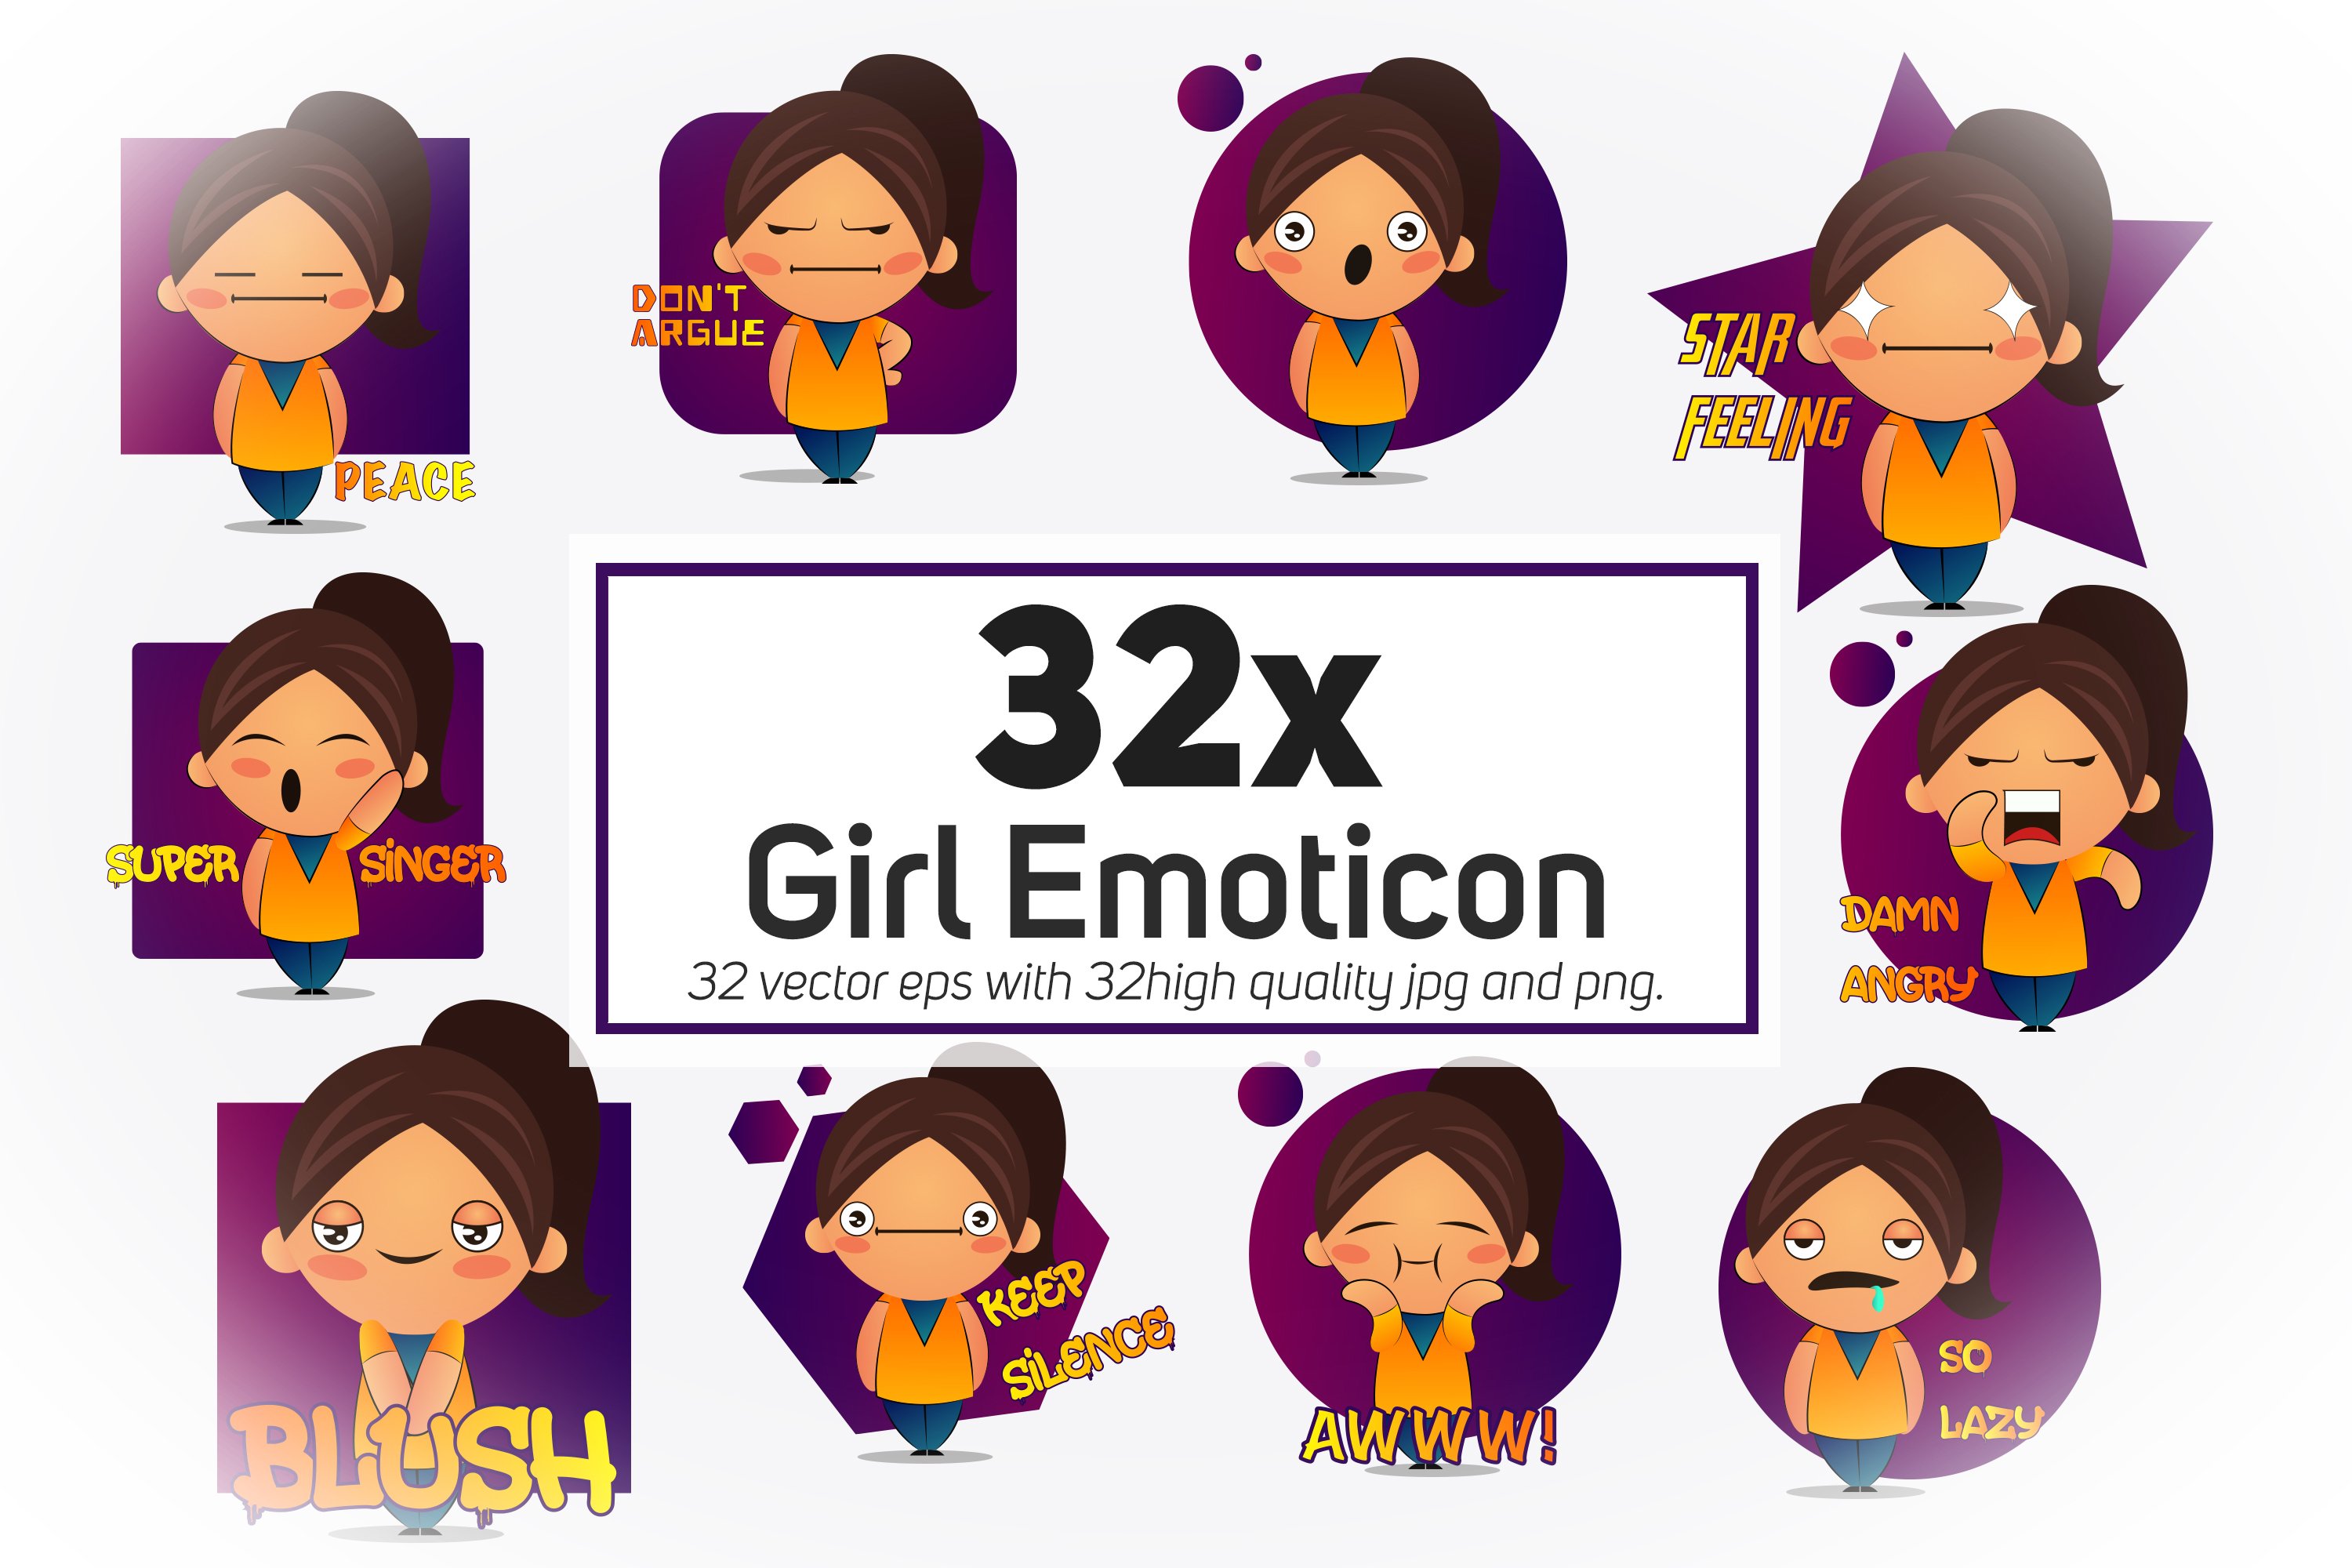 A selection of colorful images of a girl emoticon.